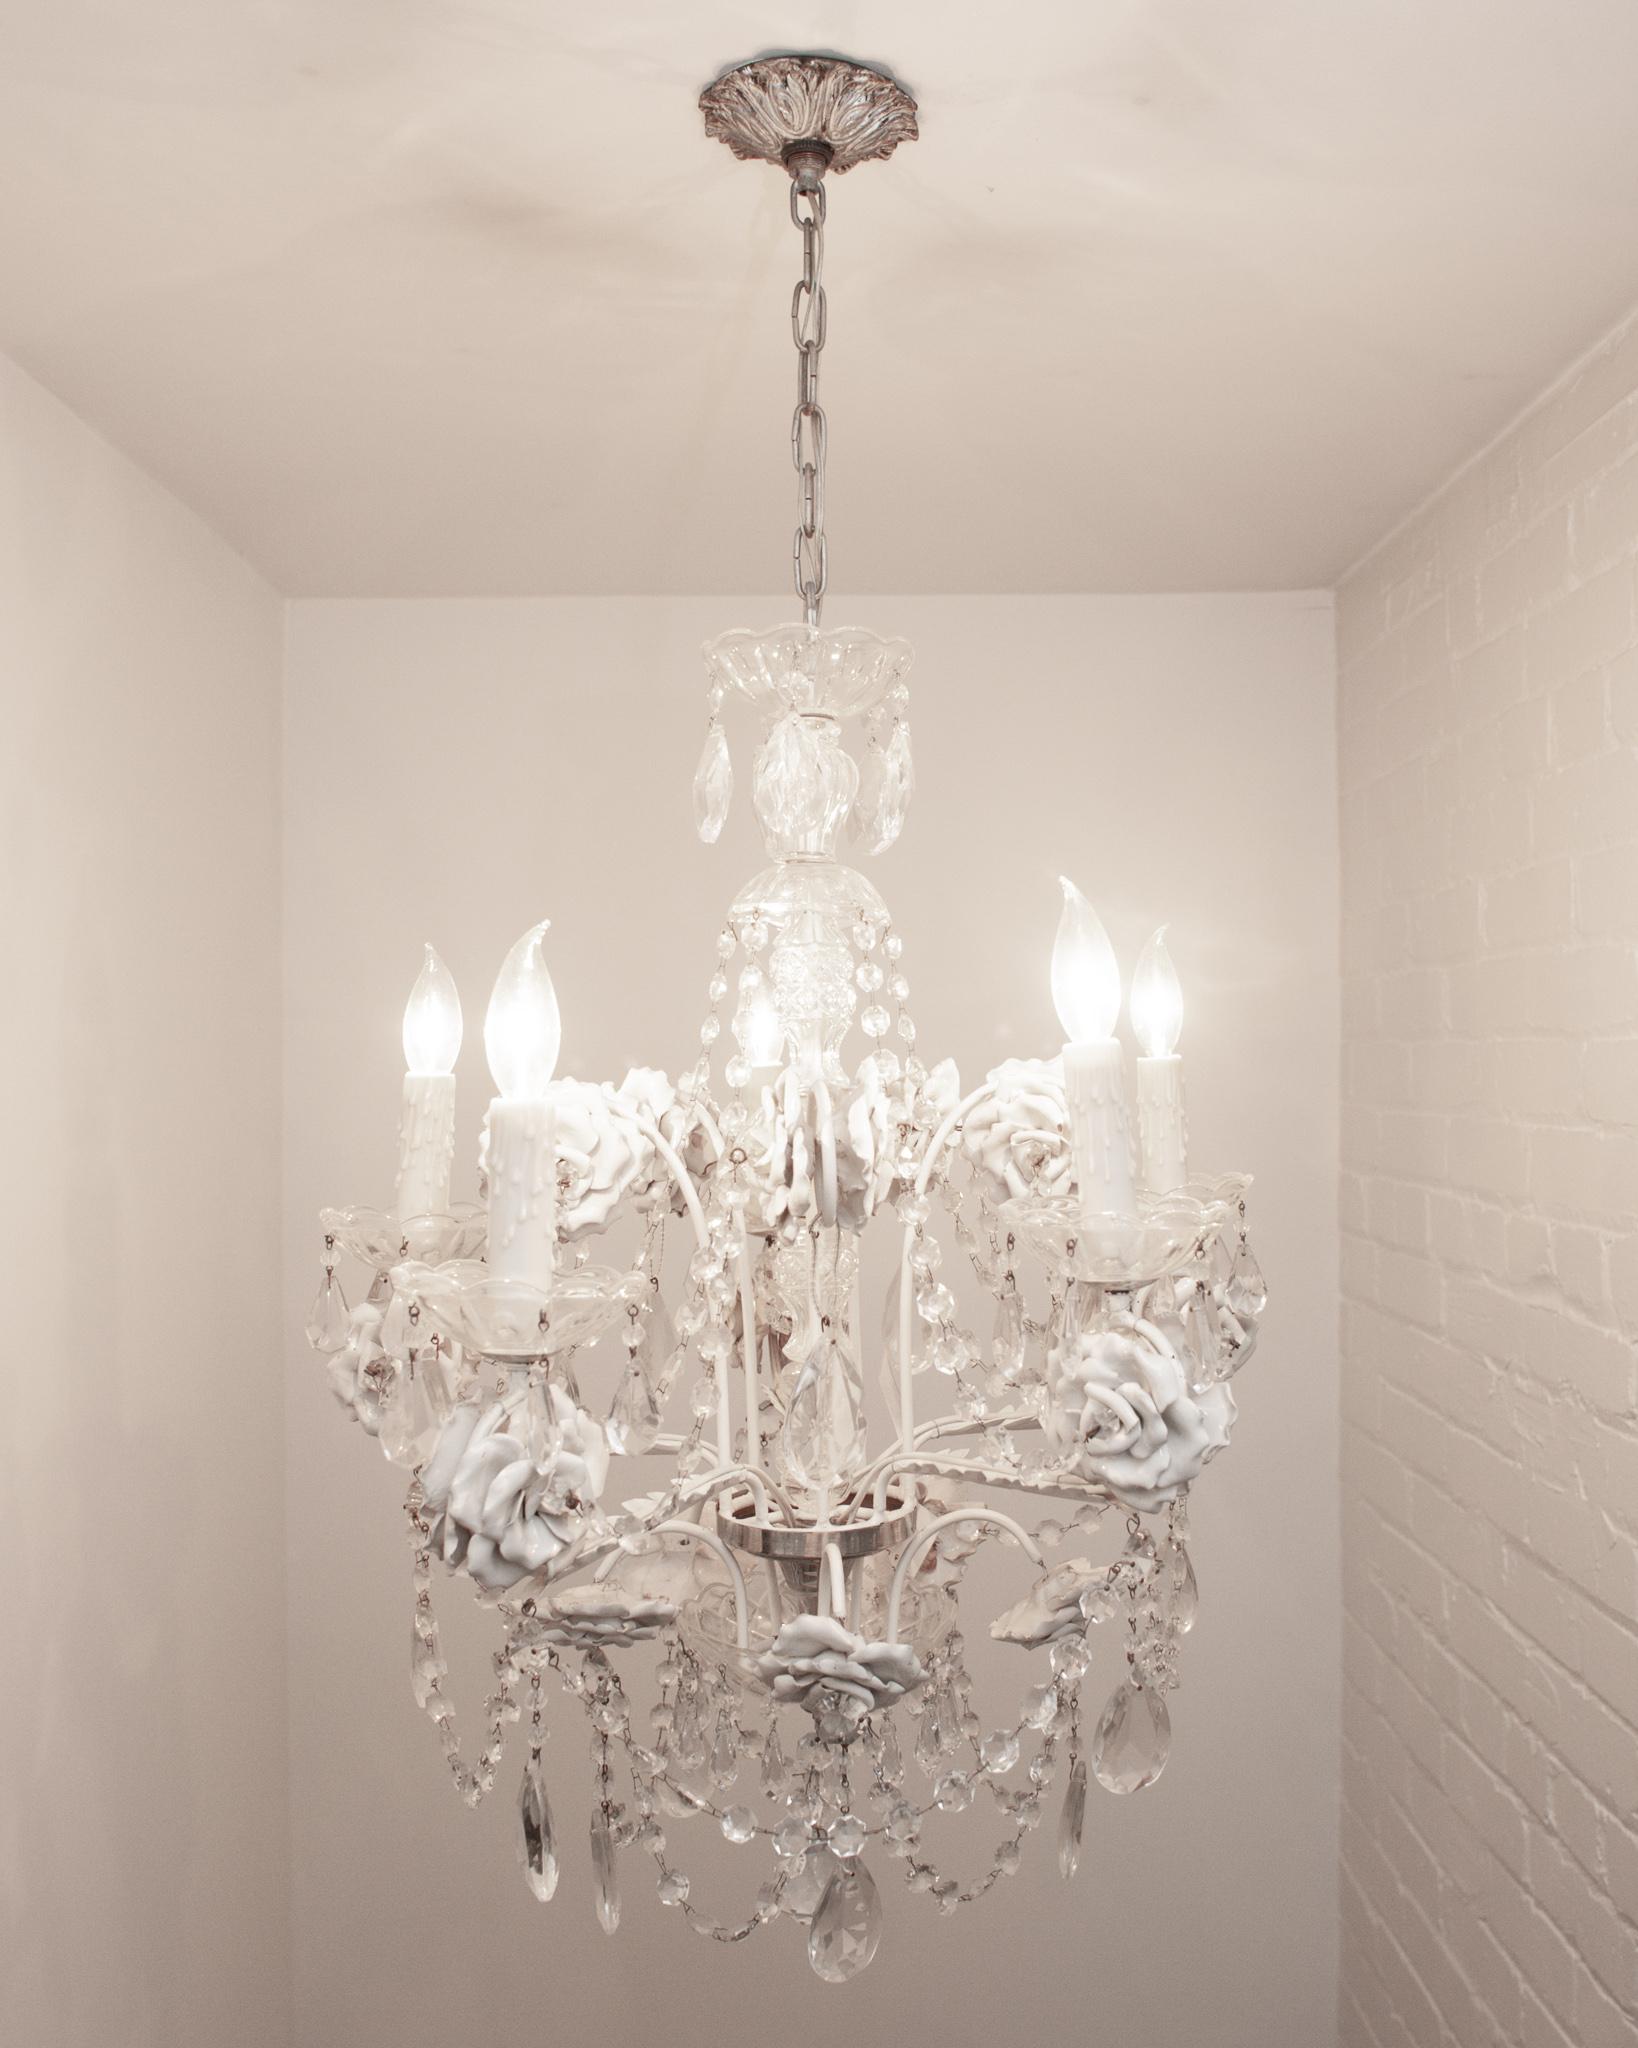 A beautiful large antique French chandelier, composed of white painted metal, crystal, and white glazed metal roses to resemble porcelain. Turn of the century production with original crystals.

Chandelier itself from bottom to top of crystal